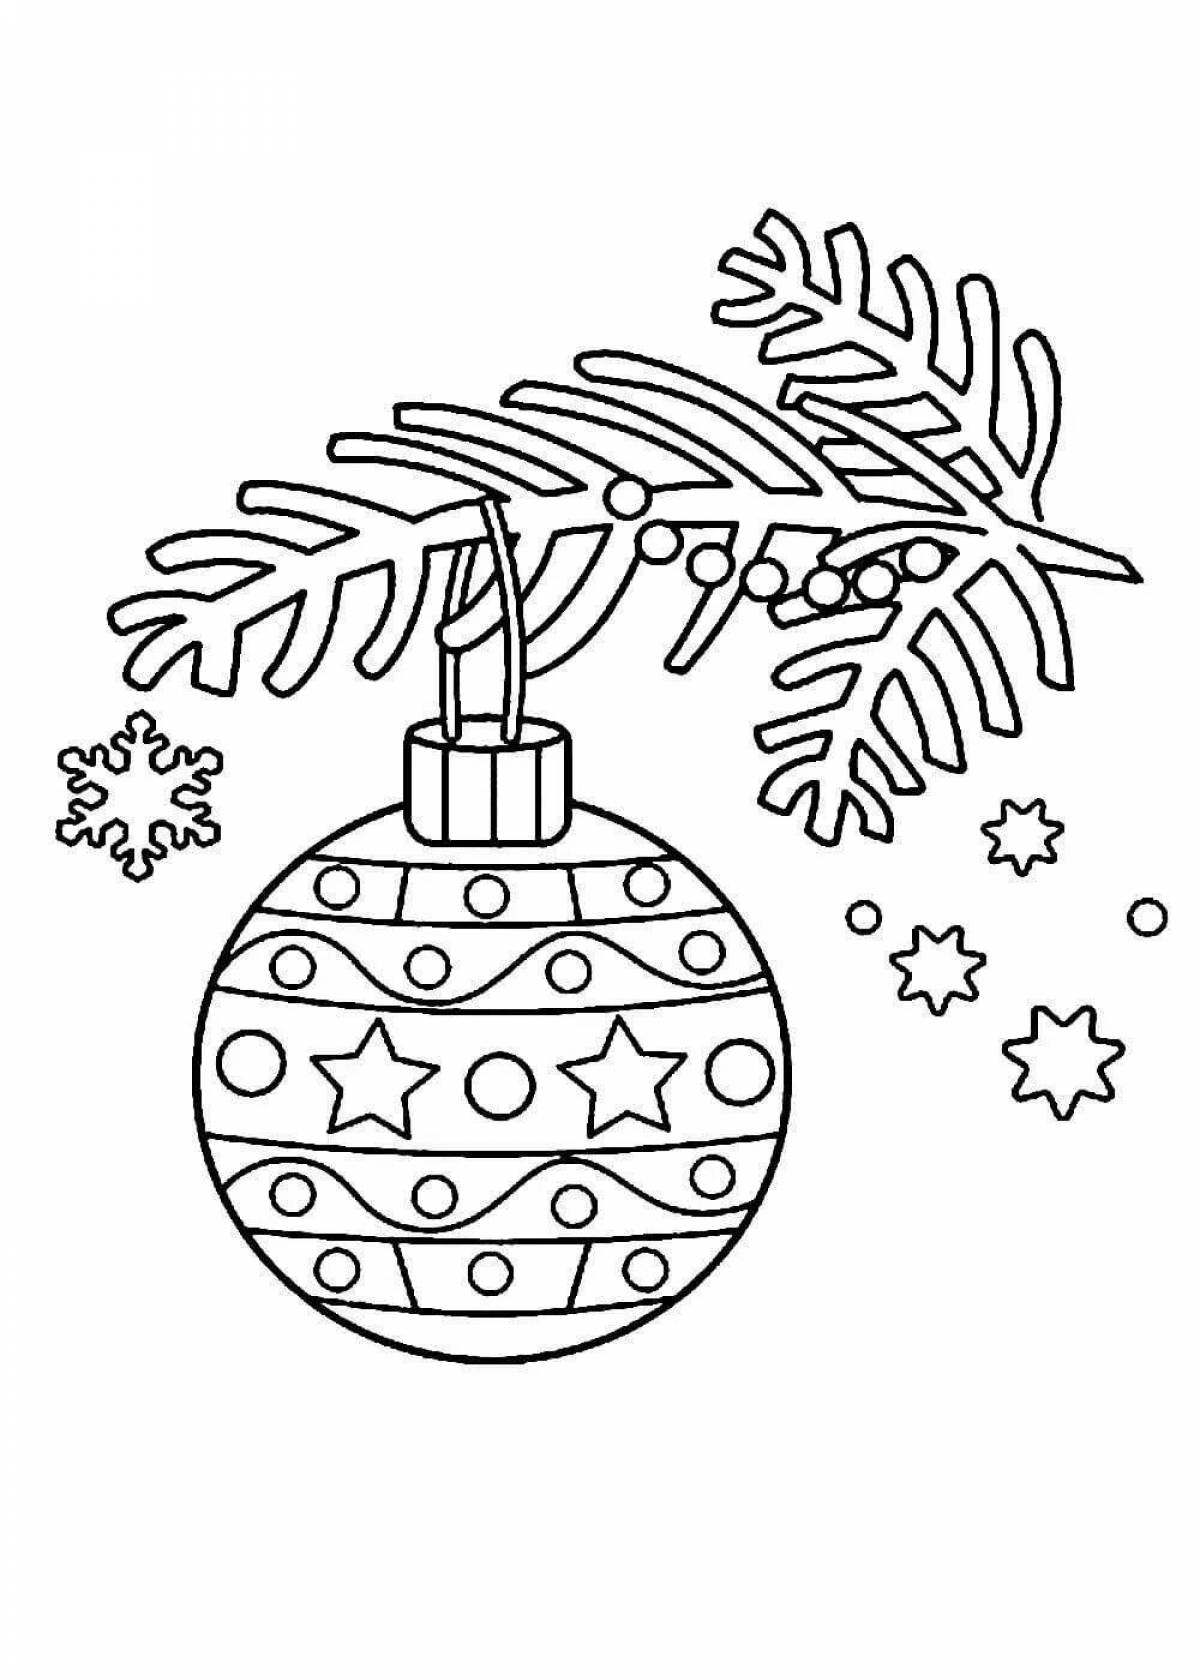 Holiday coloring tree branch with toys